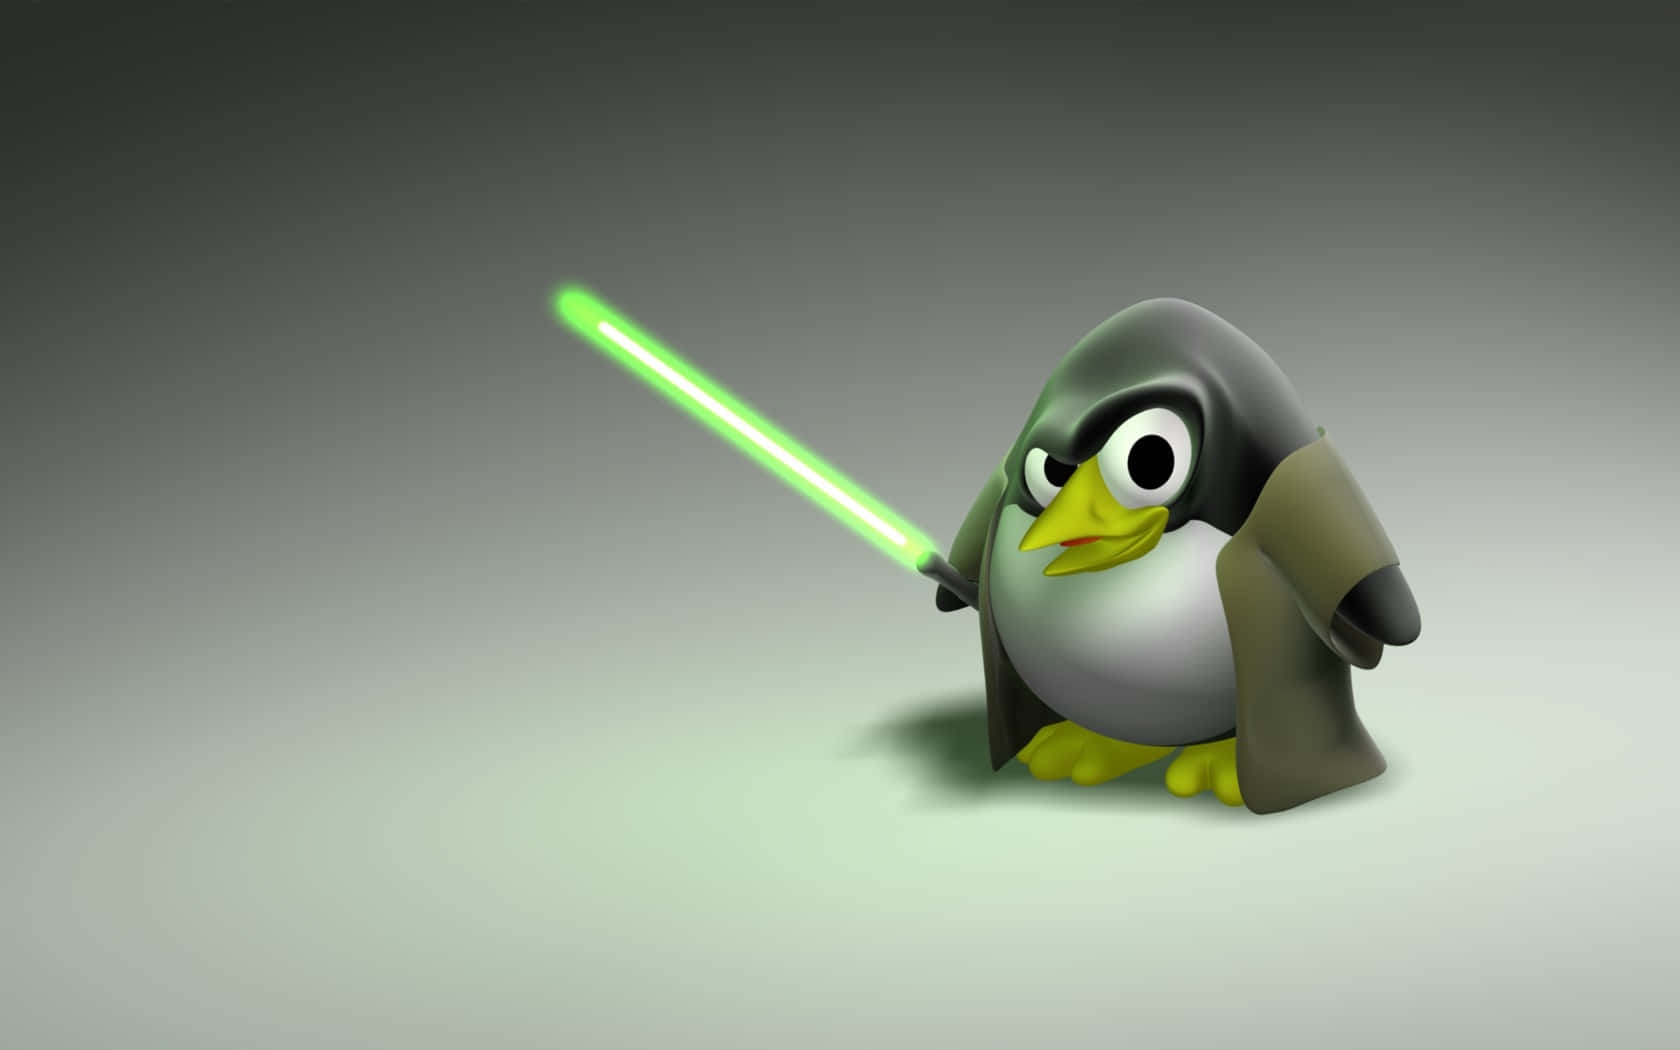 Get the most out of Linux with this full-featured desktop background